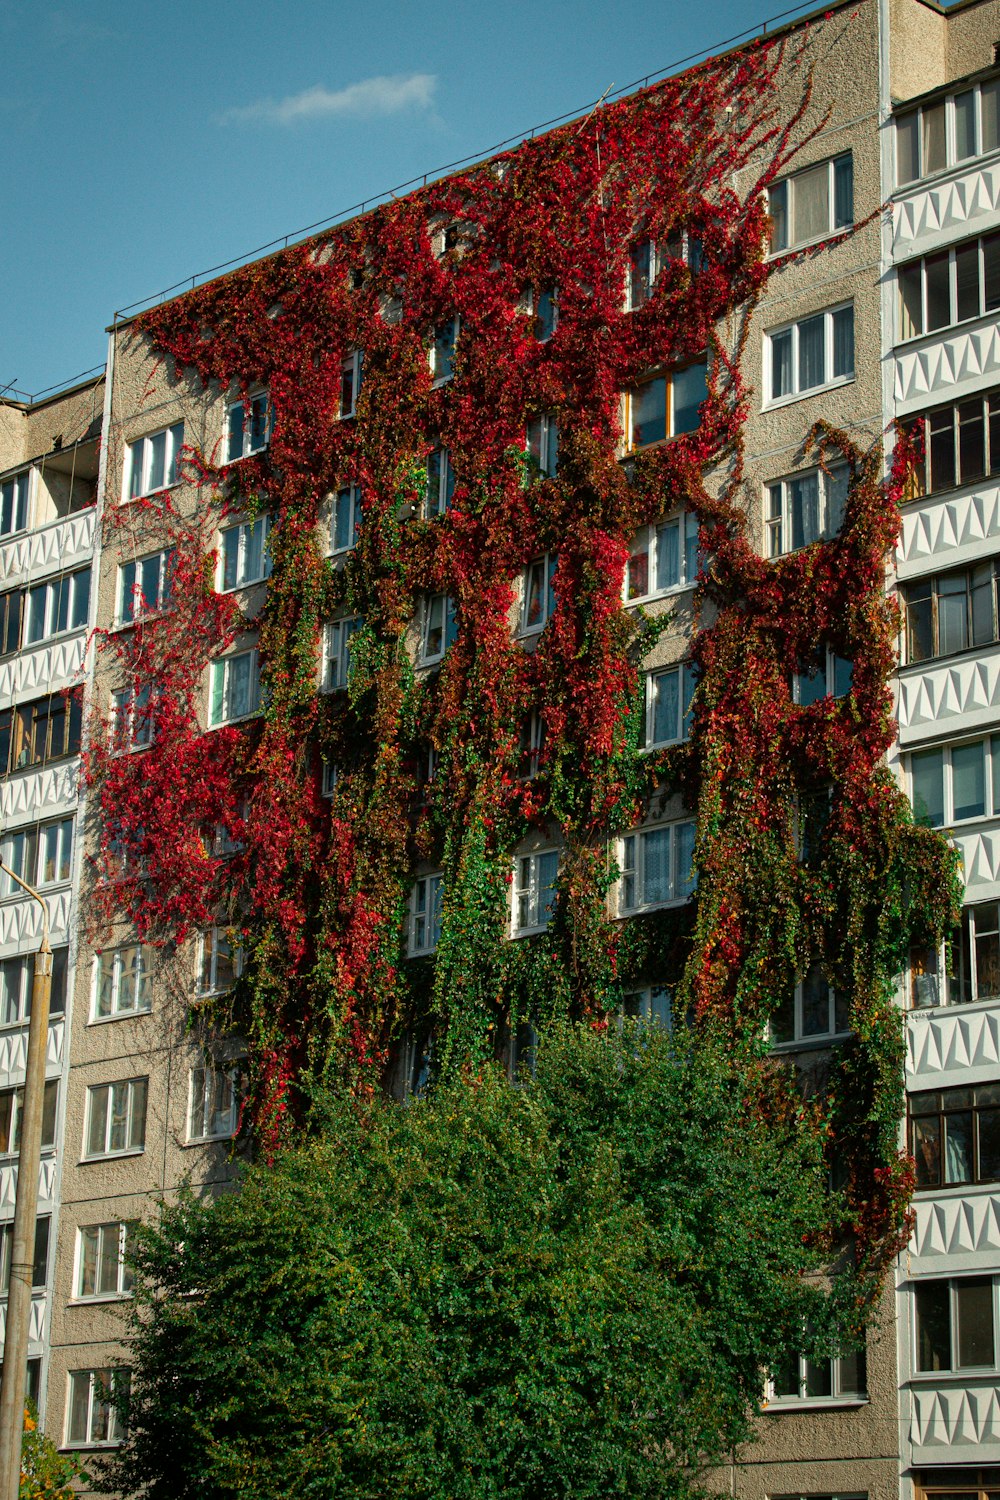 a tall building with lots of windows covered in vines